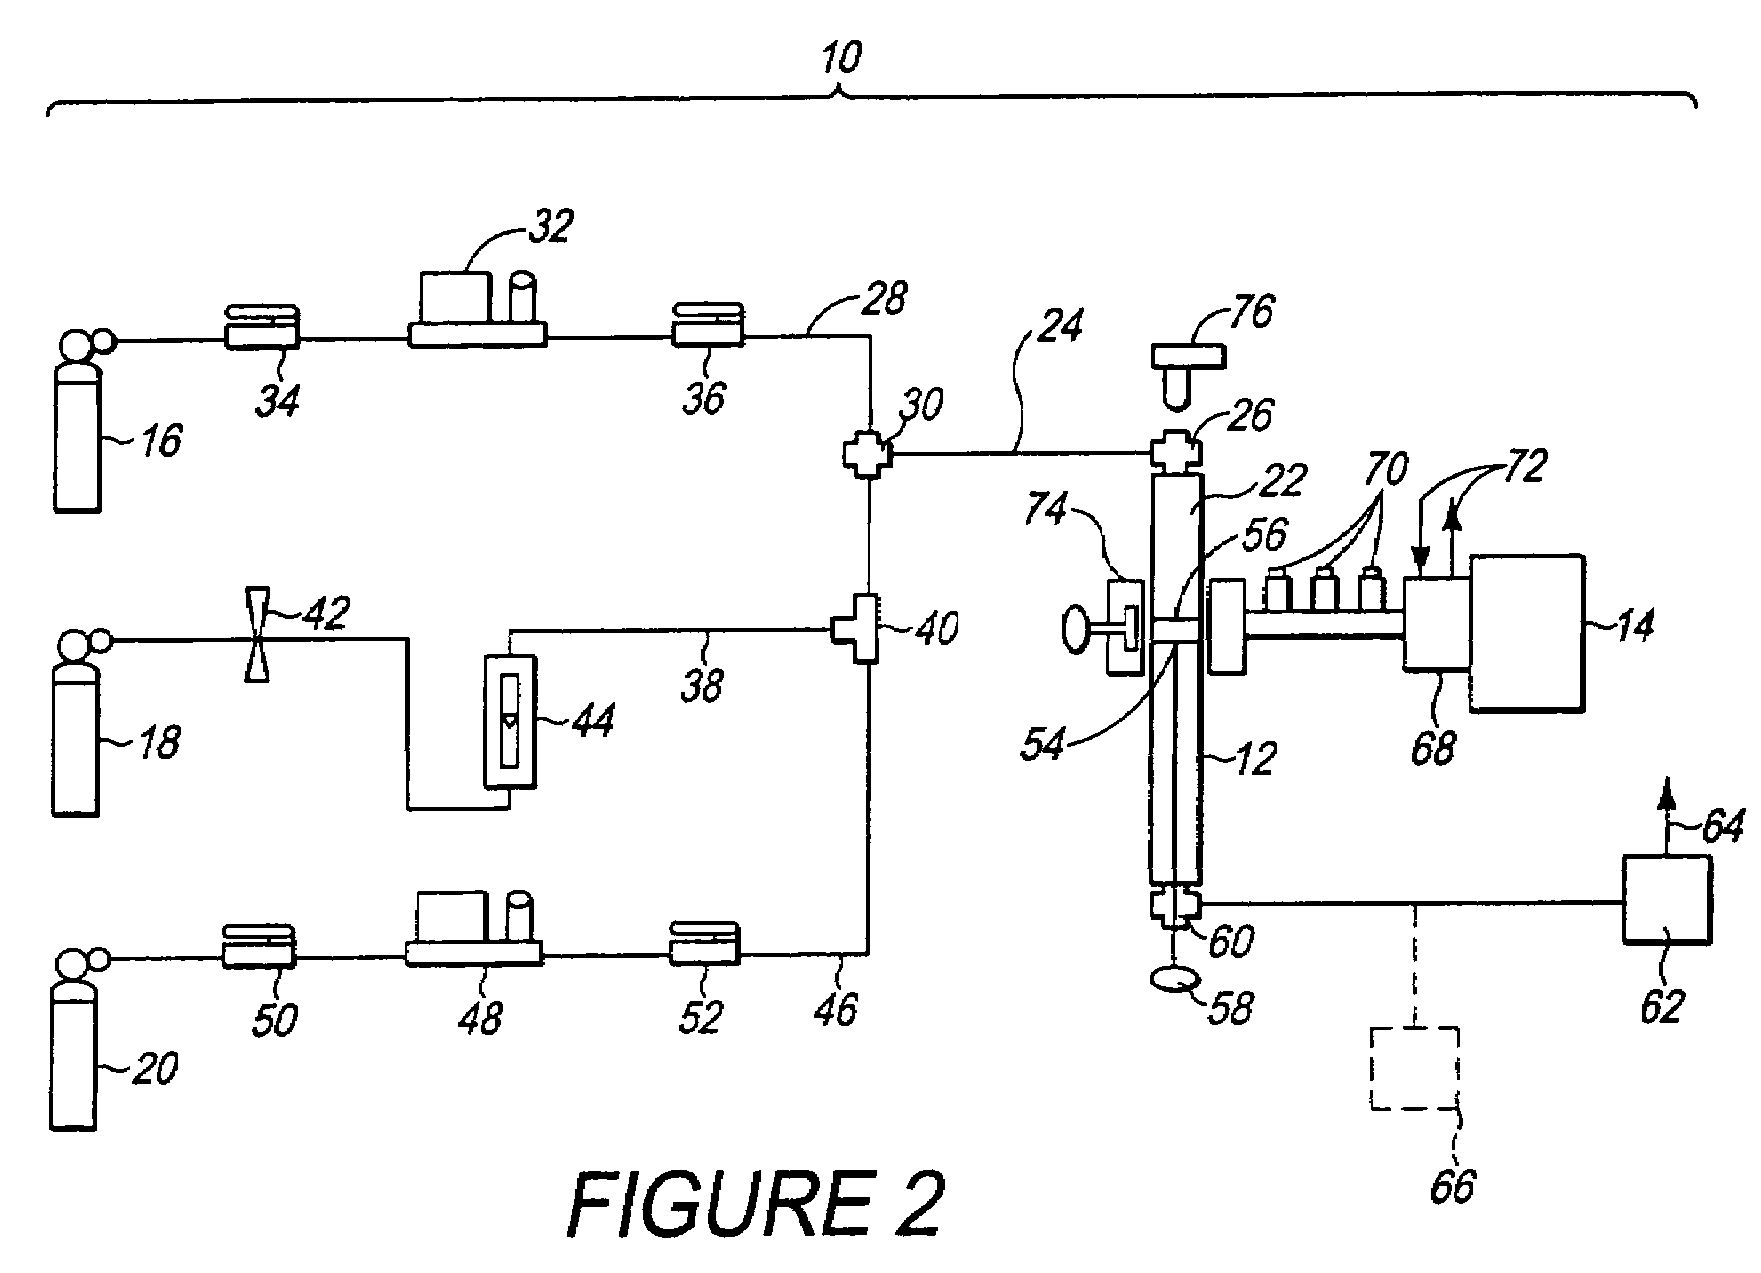 Method and system for producing a hydrogen enriched fuel using microwave assisted methane decomposition on catalyst